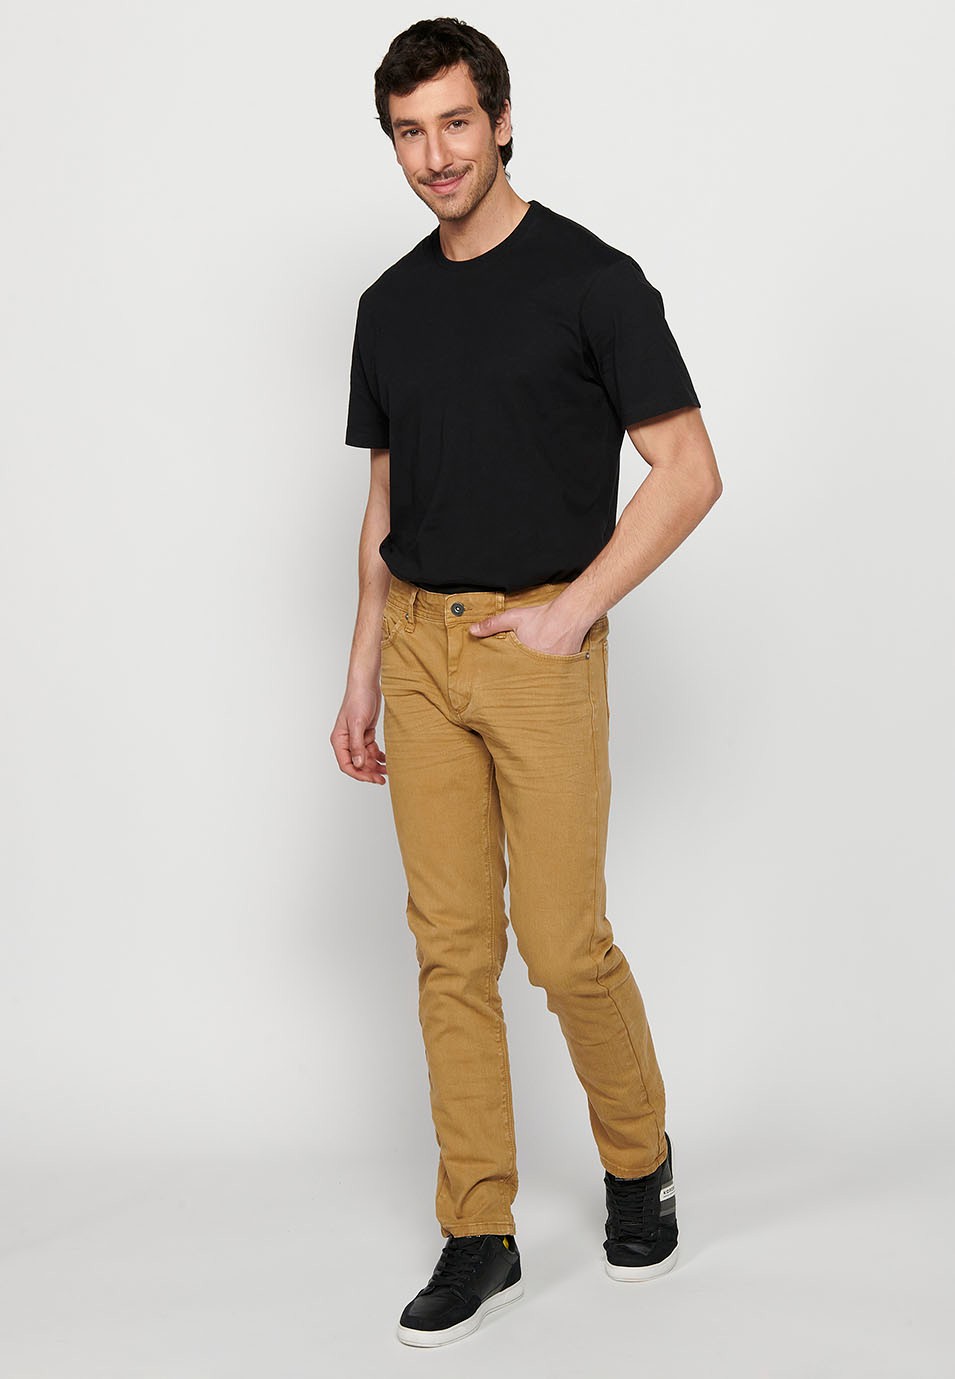 Long straight regular fit pants with front closure with zipper and button with five pockets, one pocket in Tan Color for Men